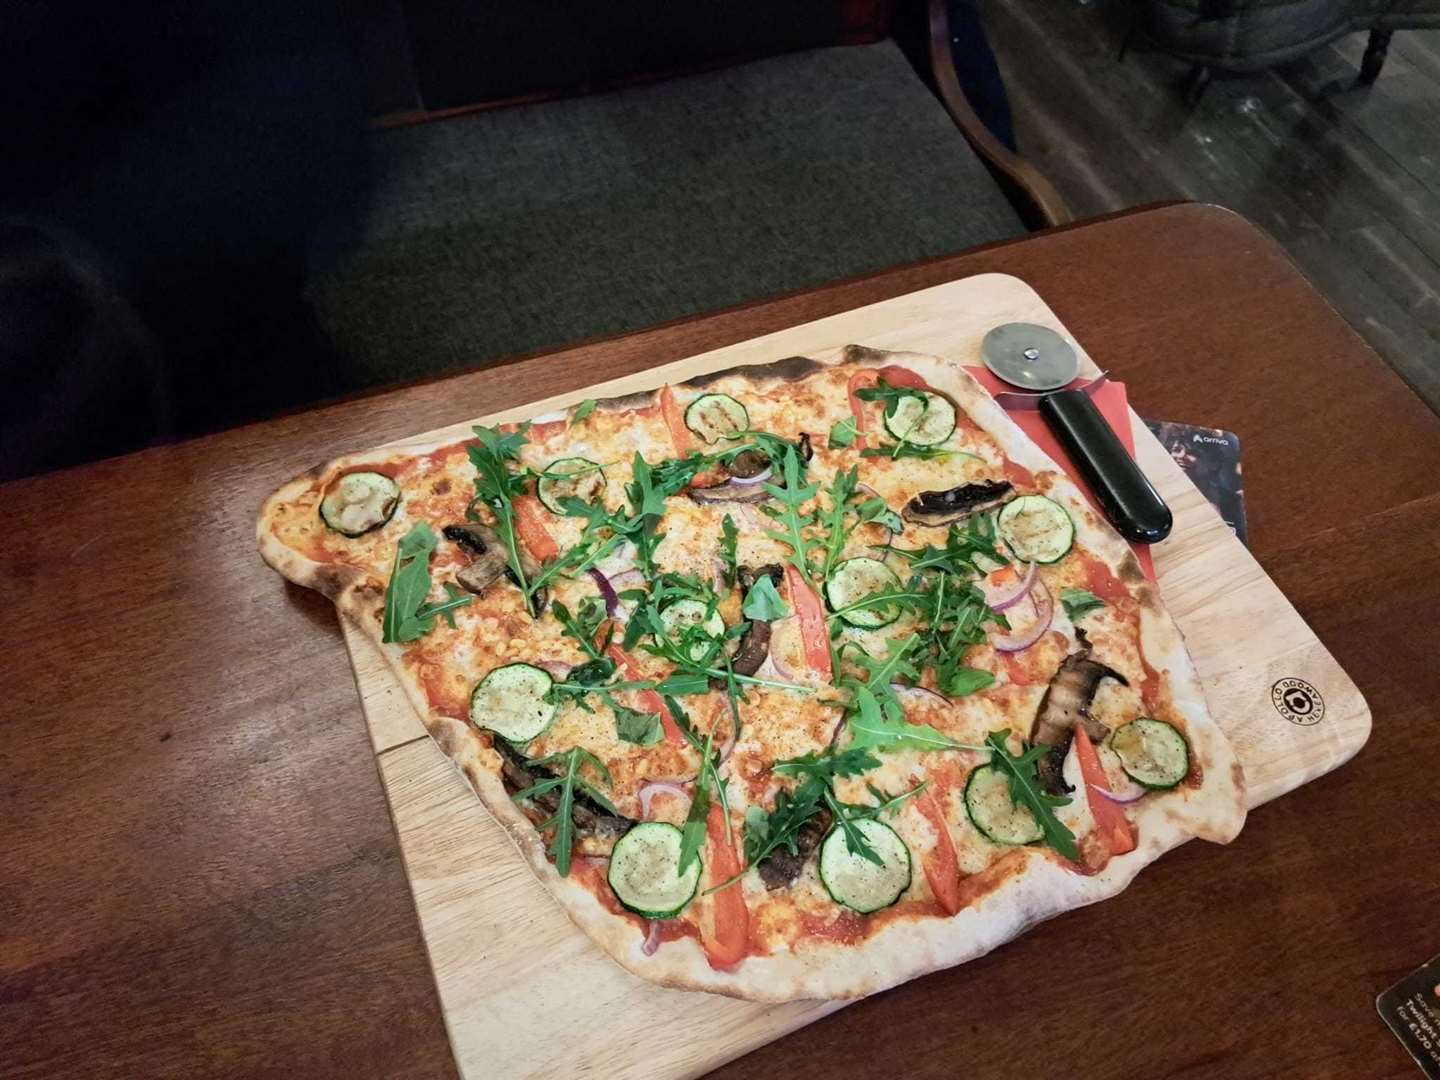 The vegetarian pizza